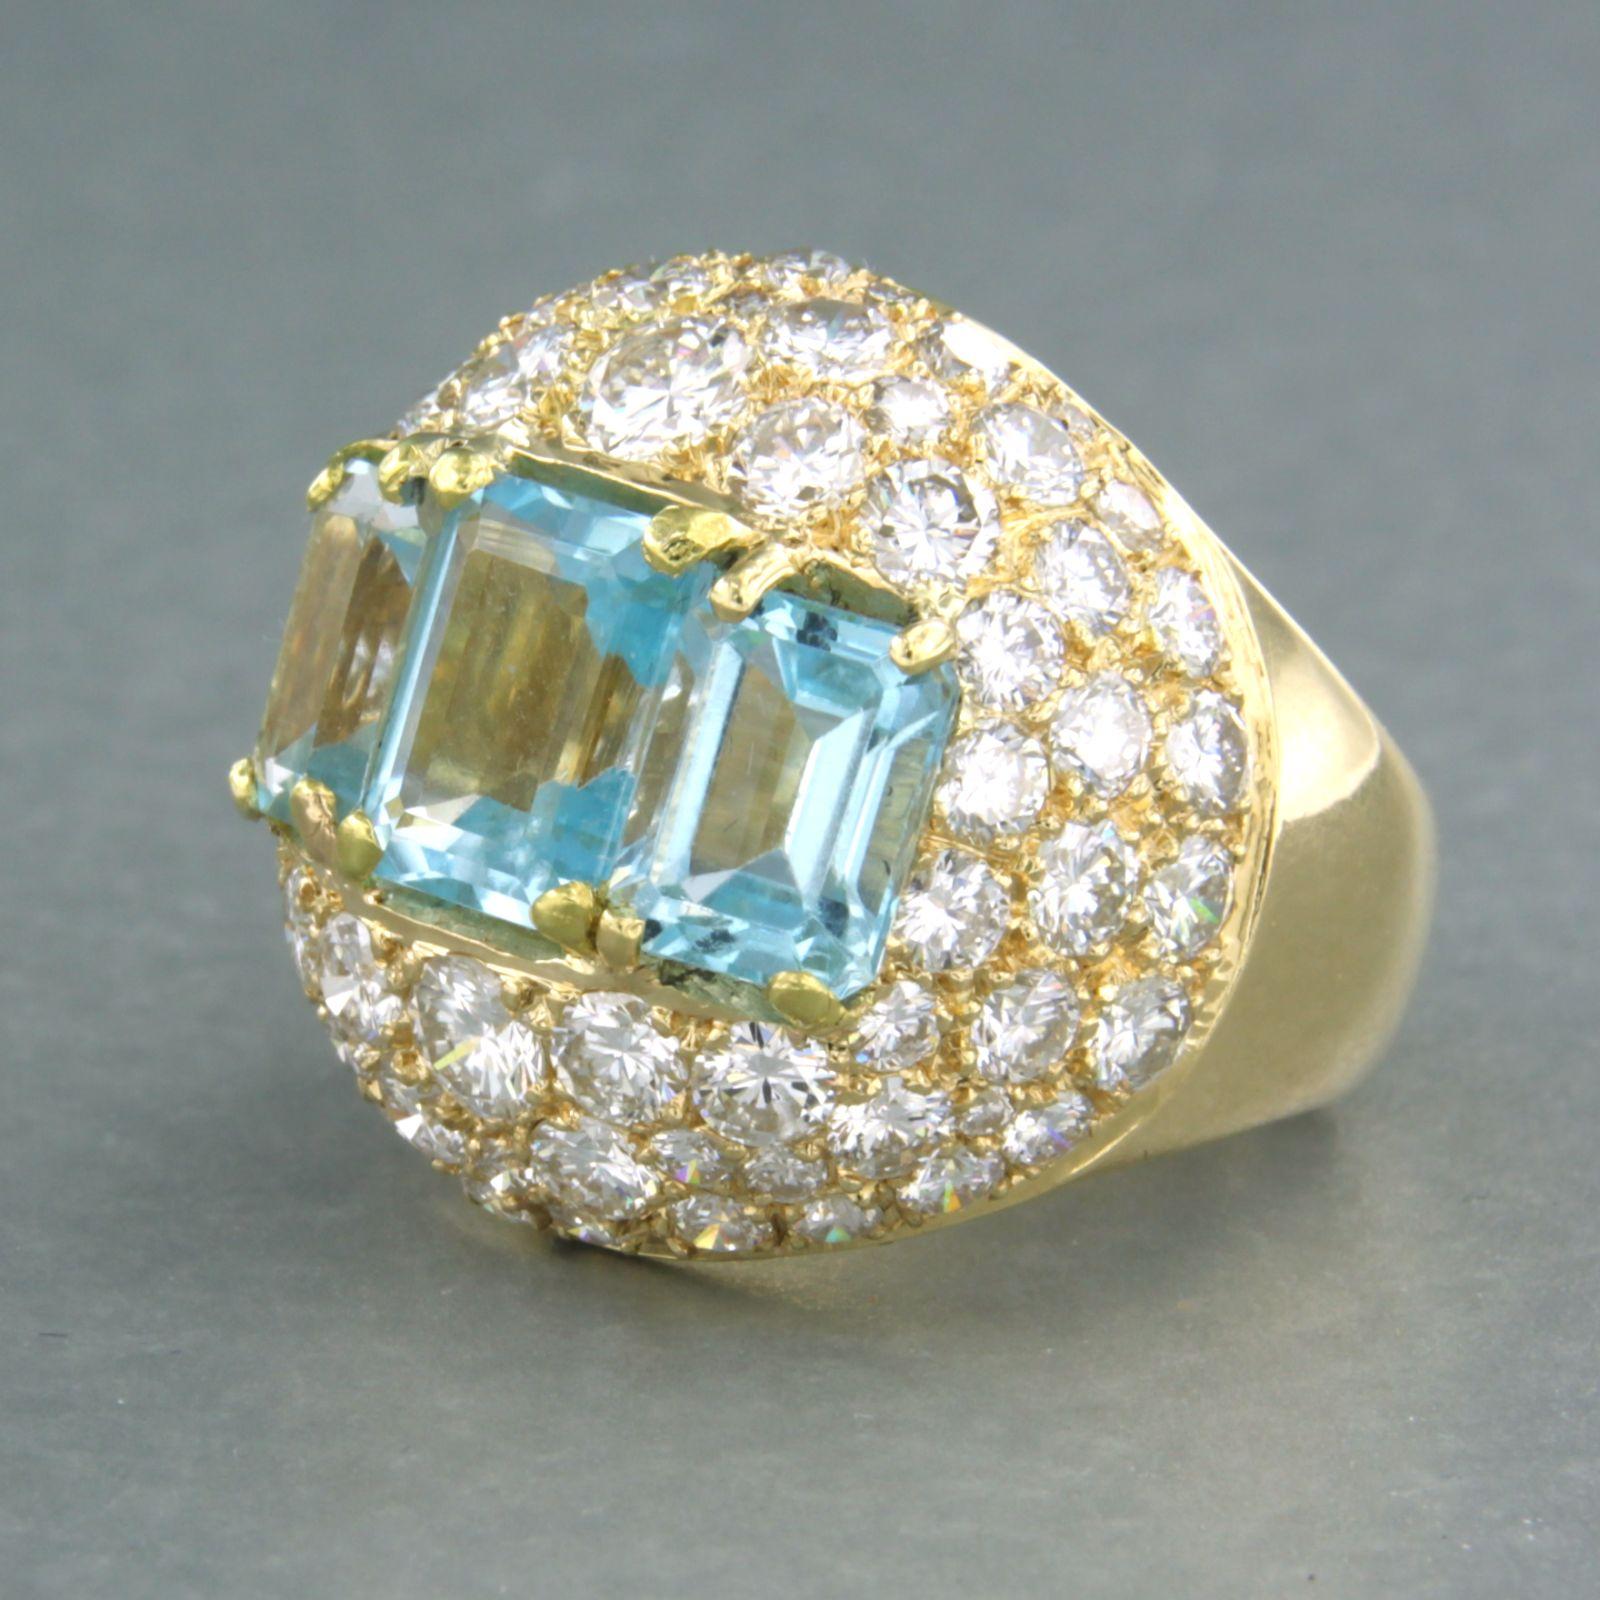 18k yellow gold ring set with blue topaz and brilliant cut diamonds. 5.30ct - F - VS/SI - ring size U.S. 6.5 - EU. 17(53)

detailed description:

the top of the ring is 2.2 cm wide by 9.3 mm high

total weight 13.8 grams

ring size US 6.5 - EU.